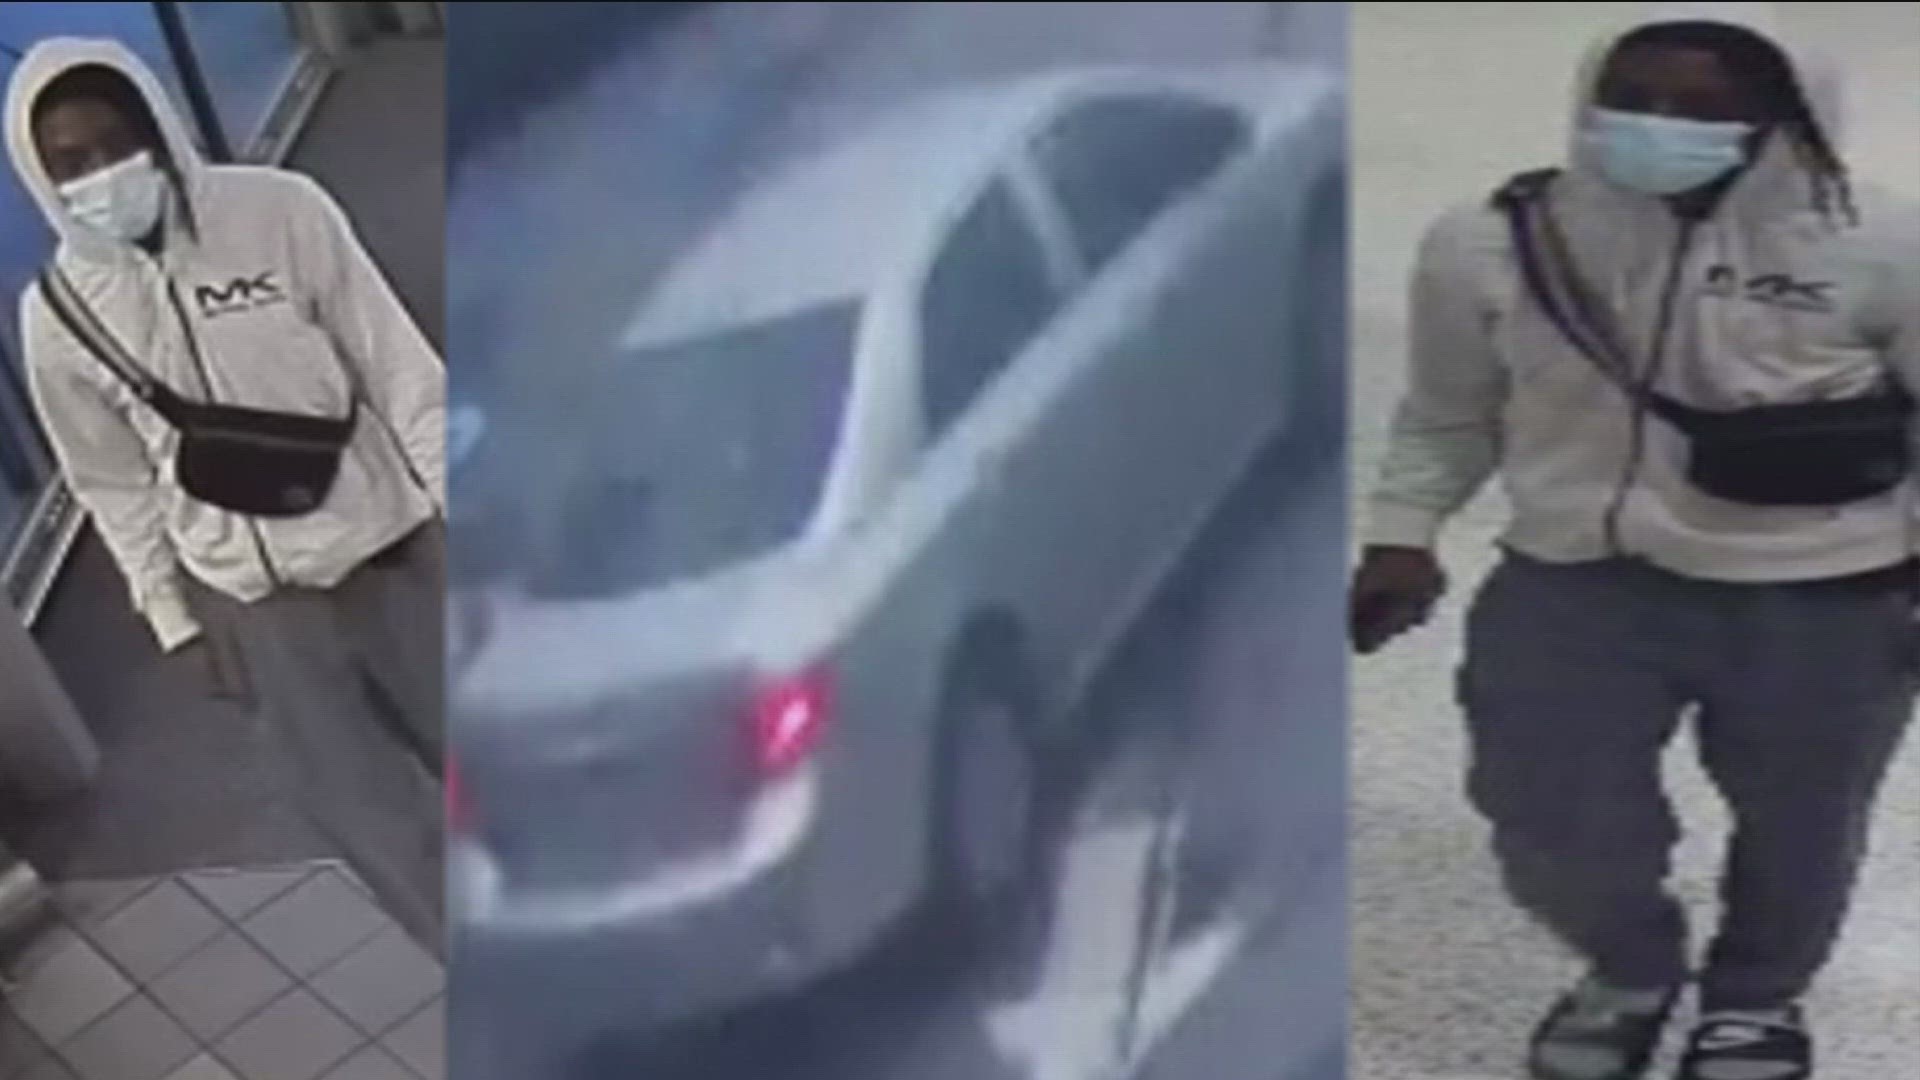 Police provided photos of the suspect in the video above.